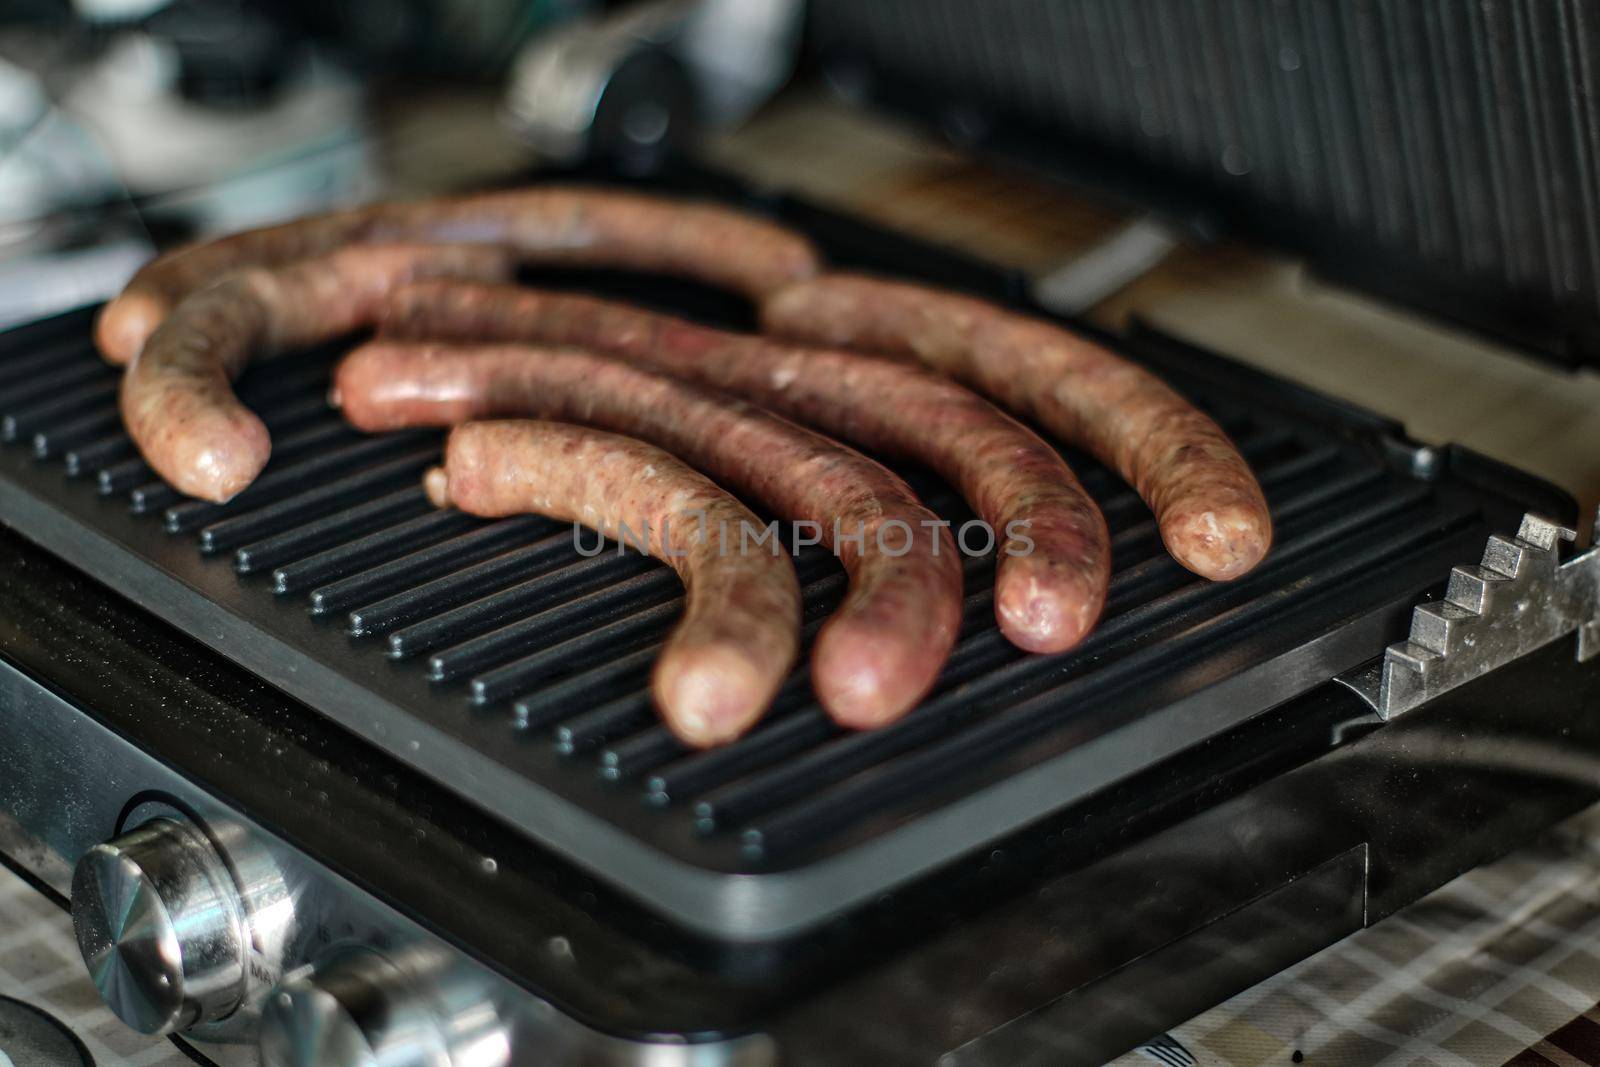 Grilled raw sausages are cooked by snep_photo